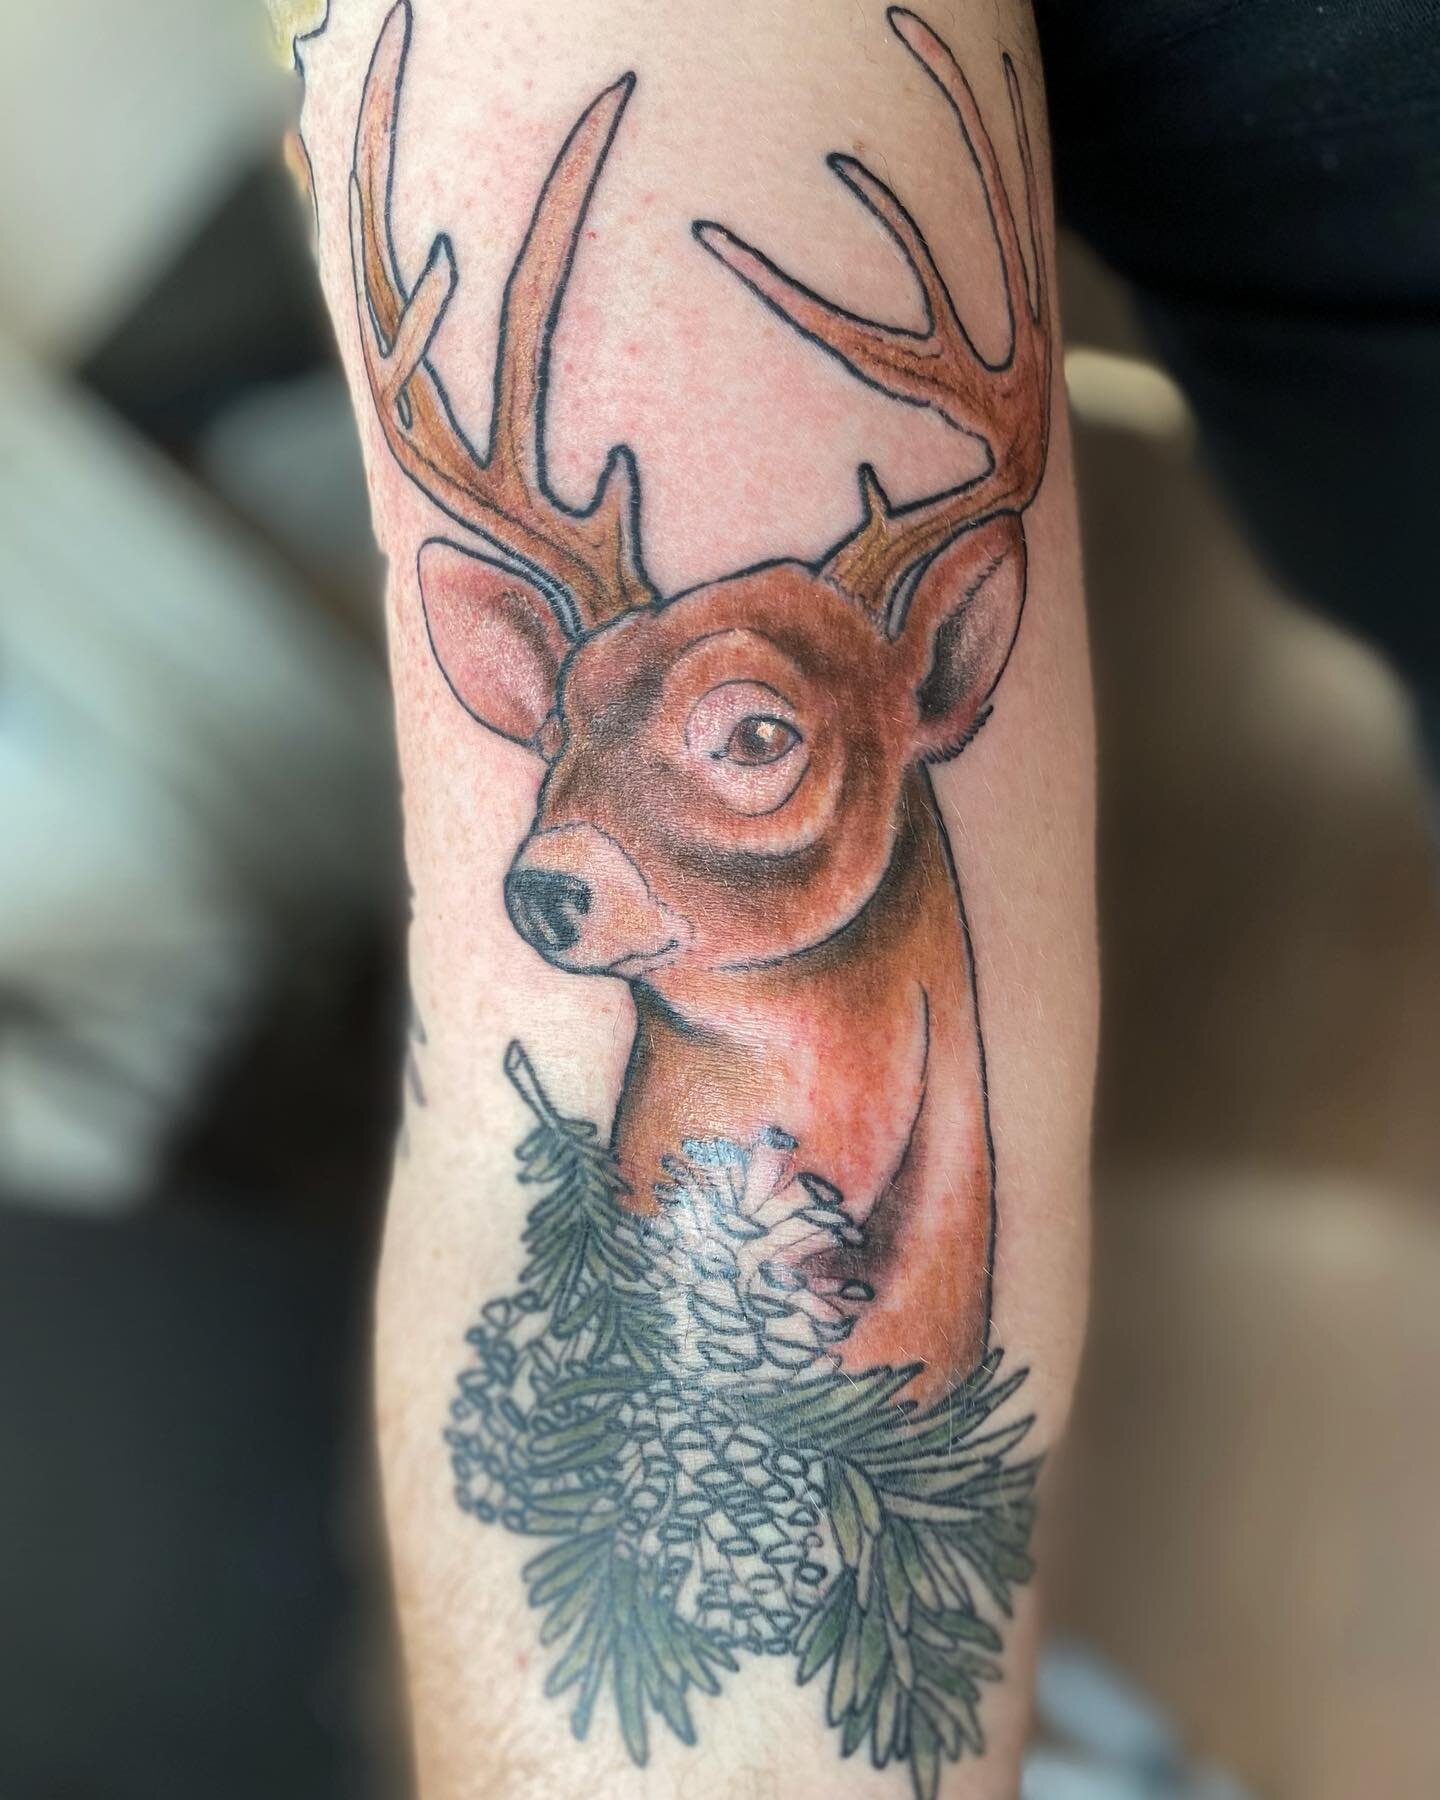 Chipping away at this Ontario flora &amp; fauna piece 🦌 more like this, please! tattoosbyloorin@gmail.com for appointments 
.
.
.
#deer #stag #deertattoo #foresttattoo #wip #toronto #torontotattoos #torontatotattooartist #cabbagetown #cabbagetowntat